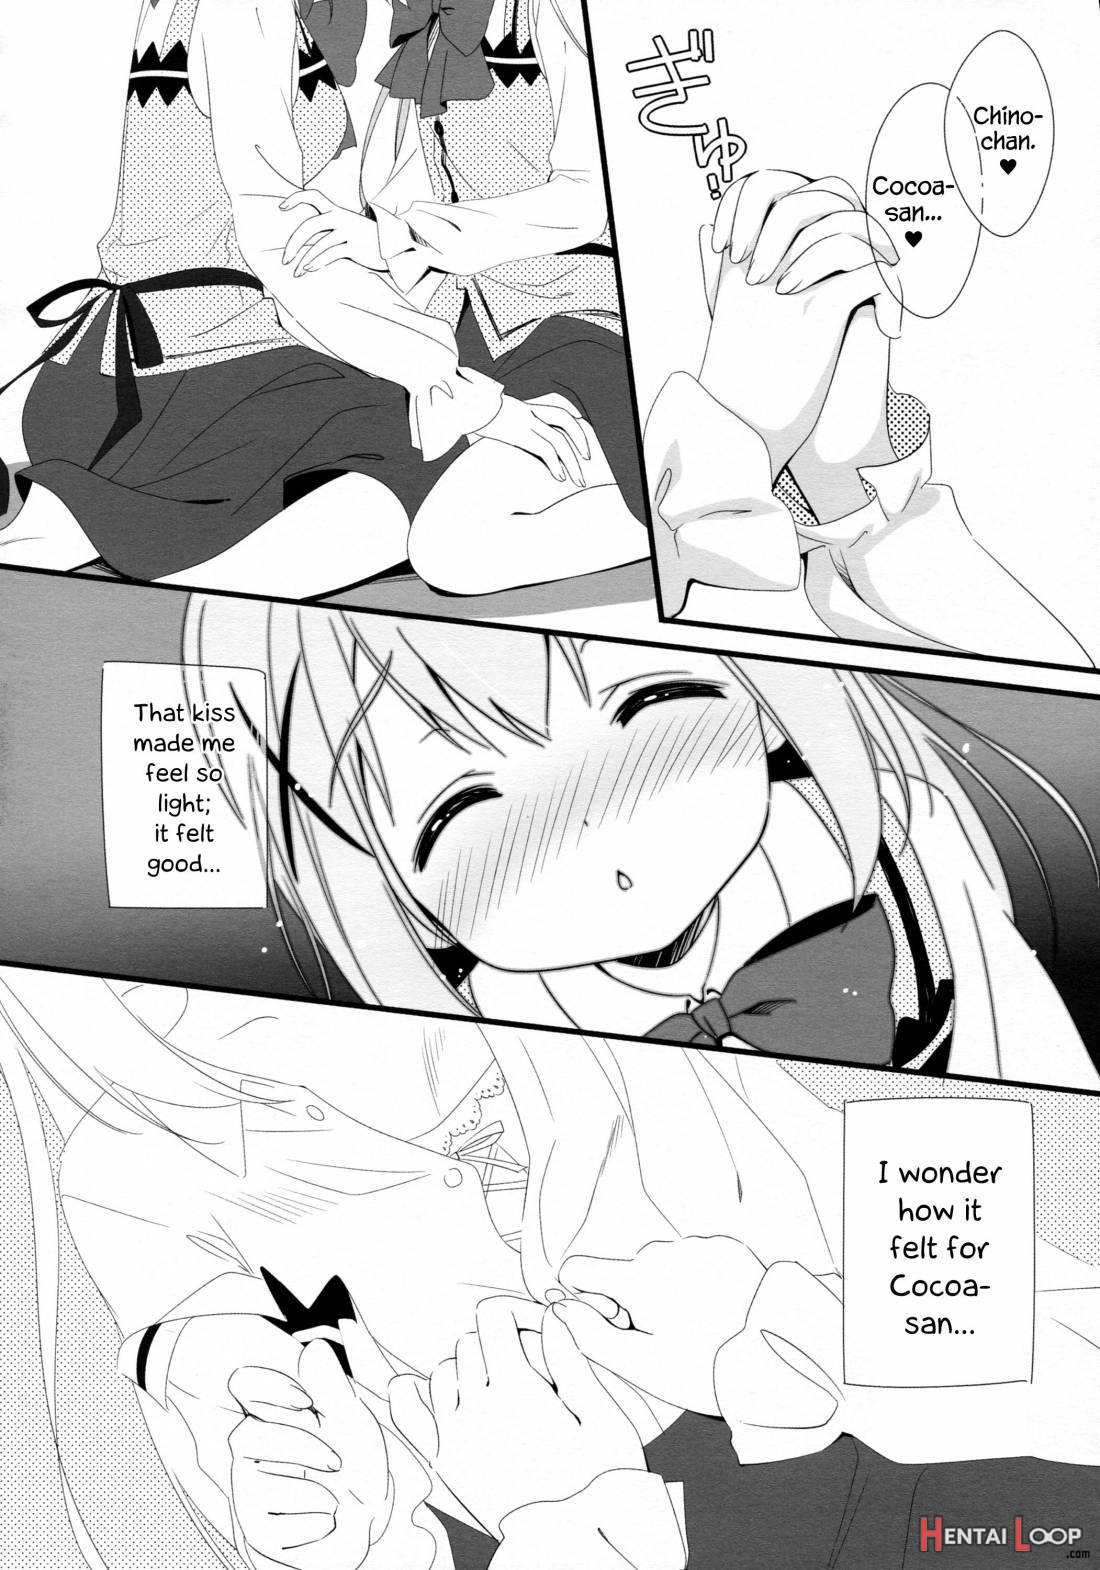 CocoaCappuccino page 7